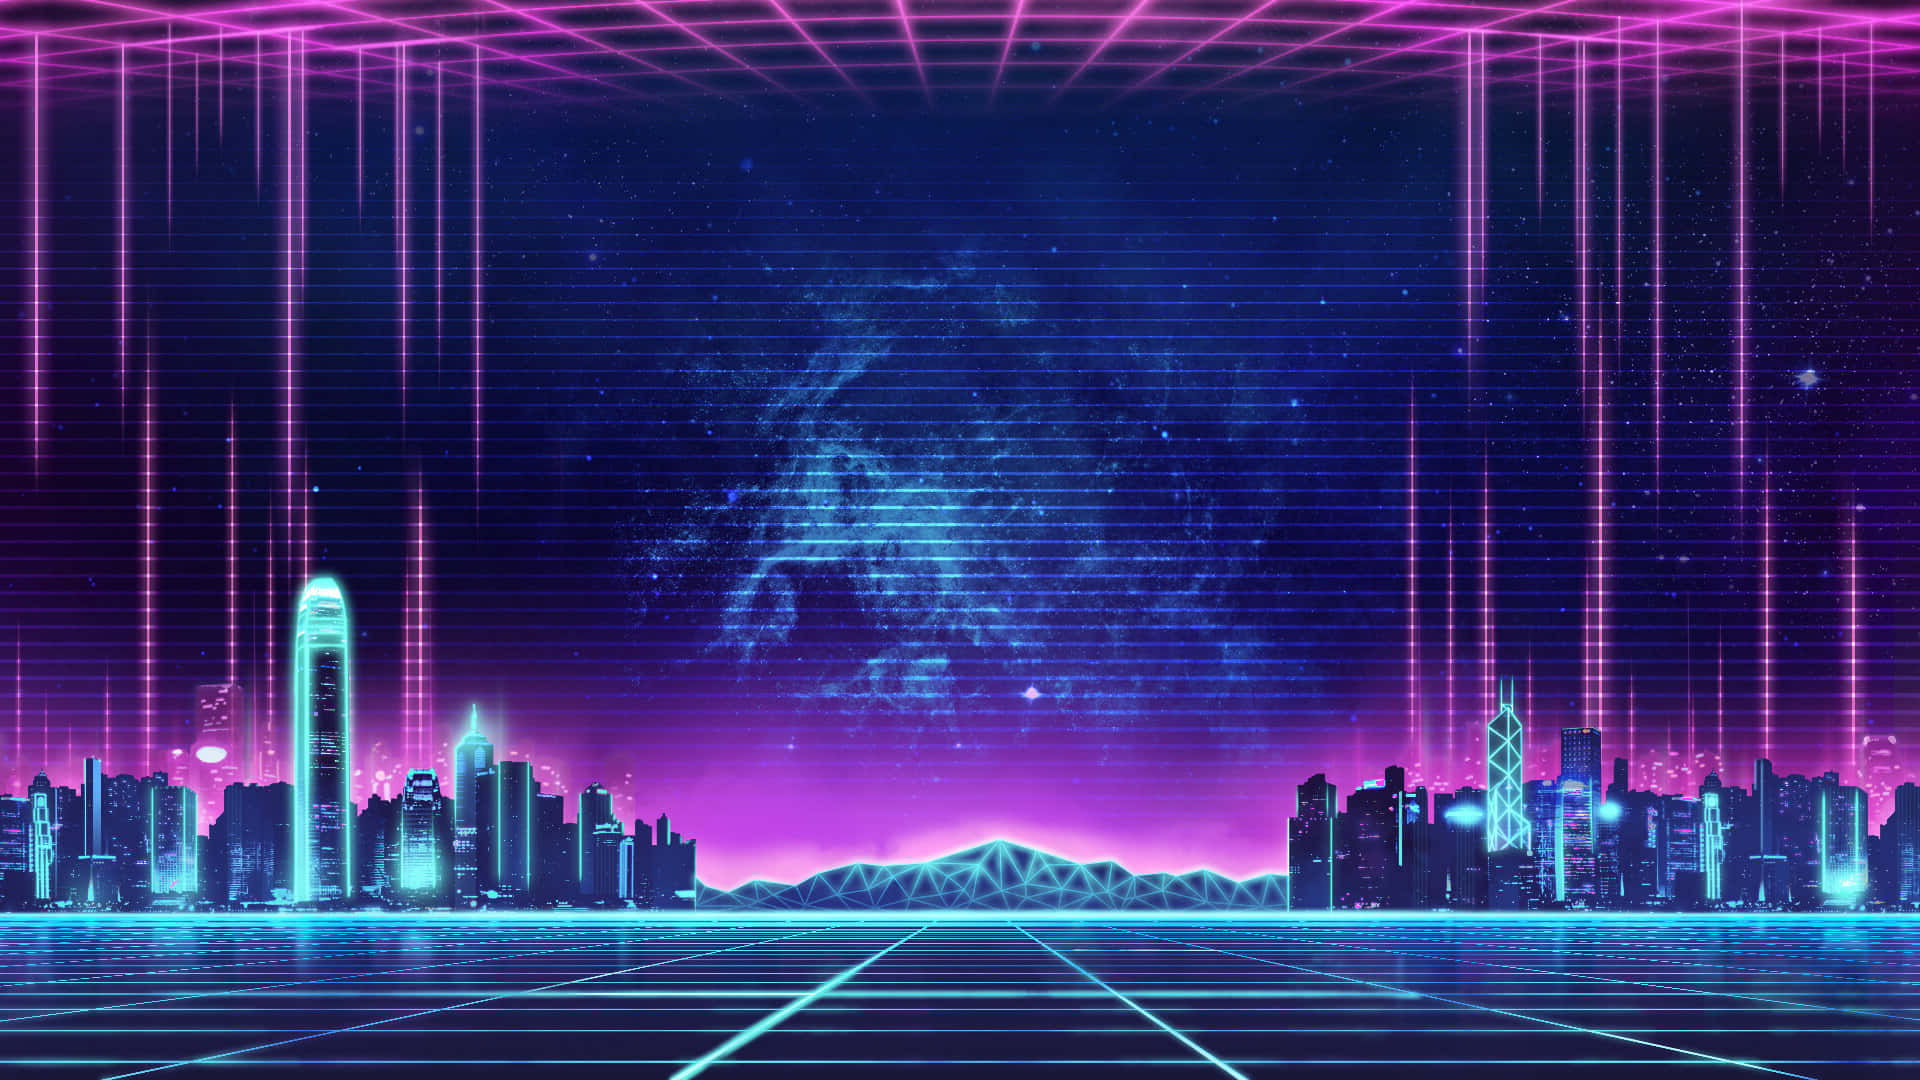 Exhilarating journey through the electric synthwave soundscapes